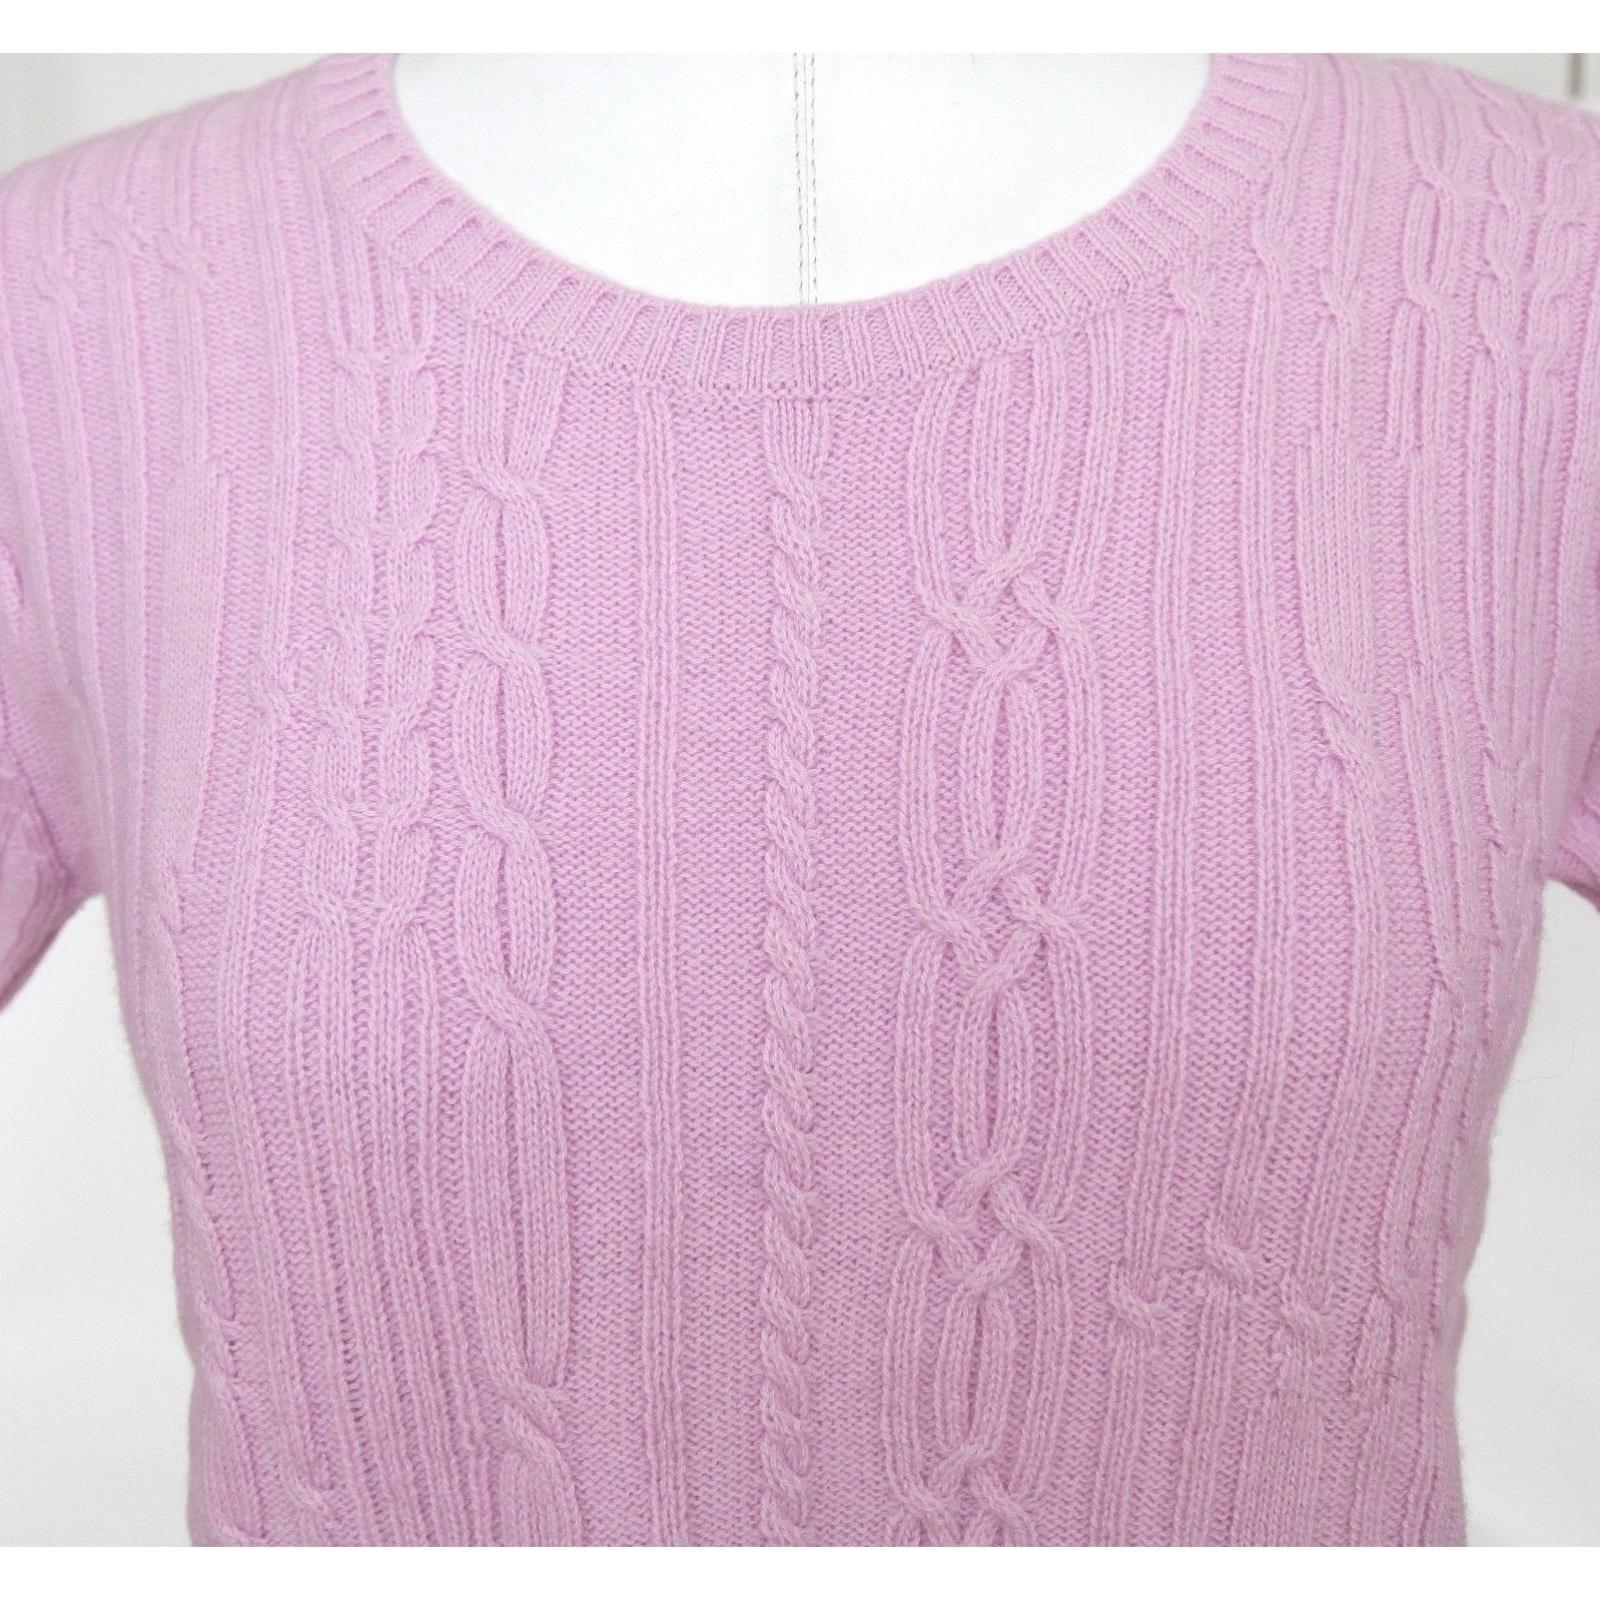 CHLOE Sweater Knit Short Sleeve Top Pink Crew Neck Wool Sz S In Excellent Condition For Sale In Hollywood, FL